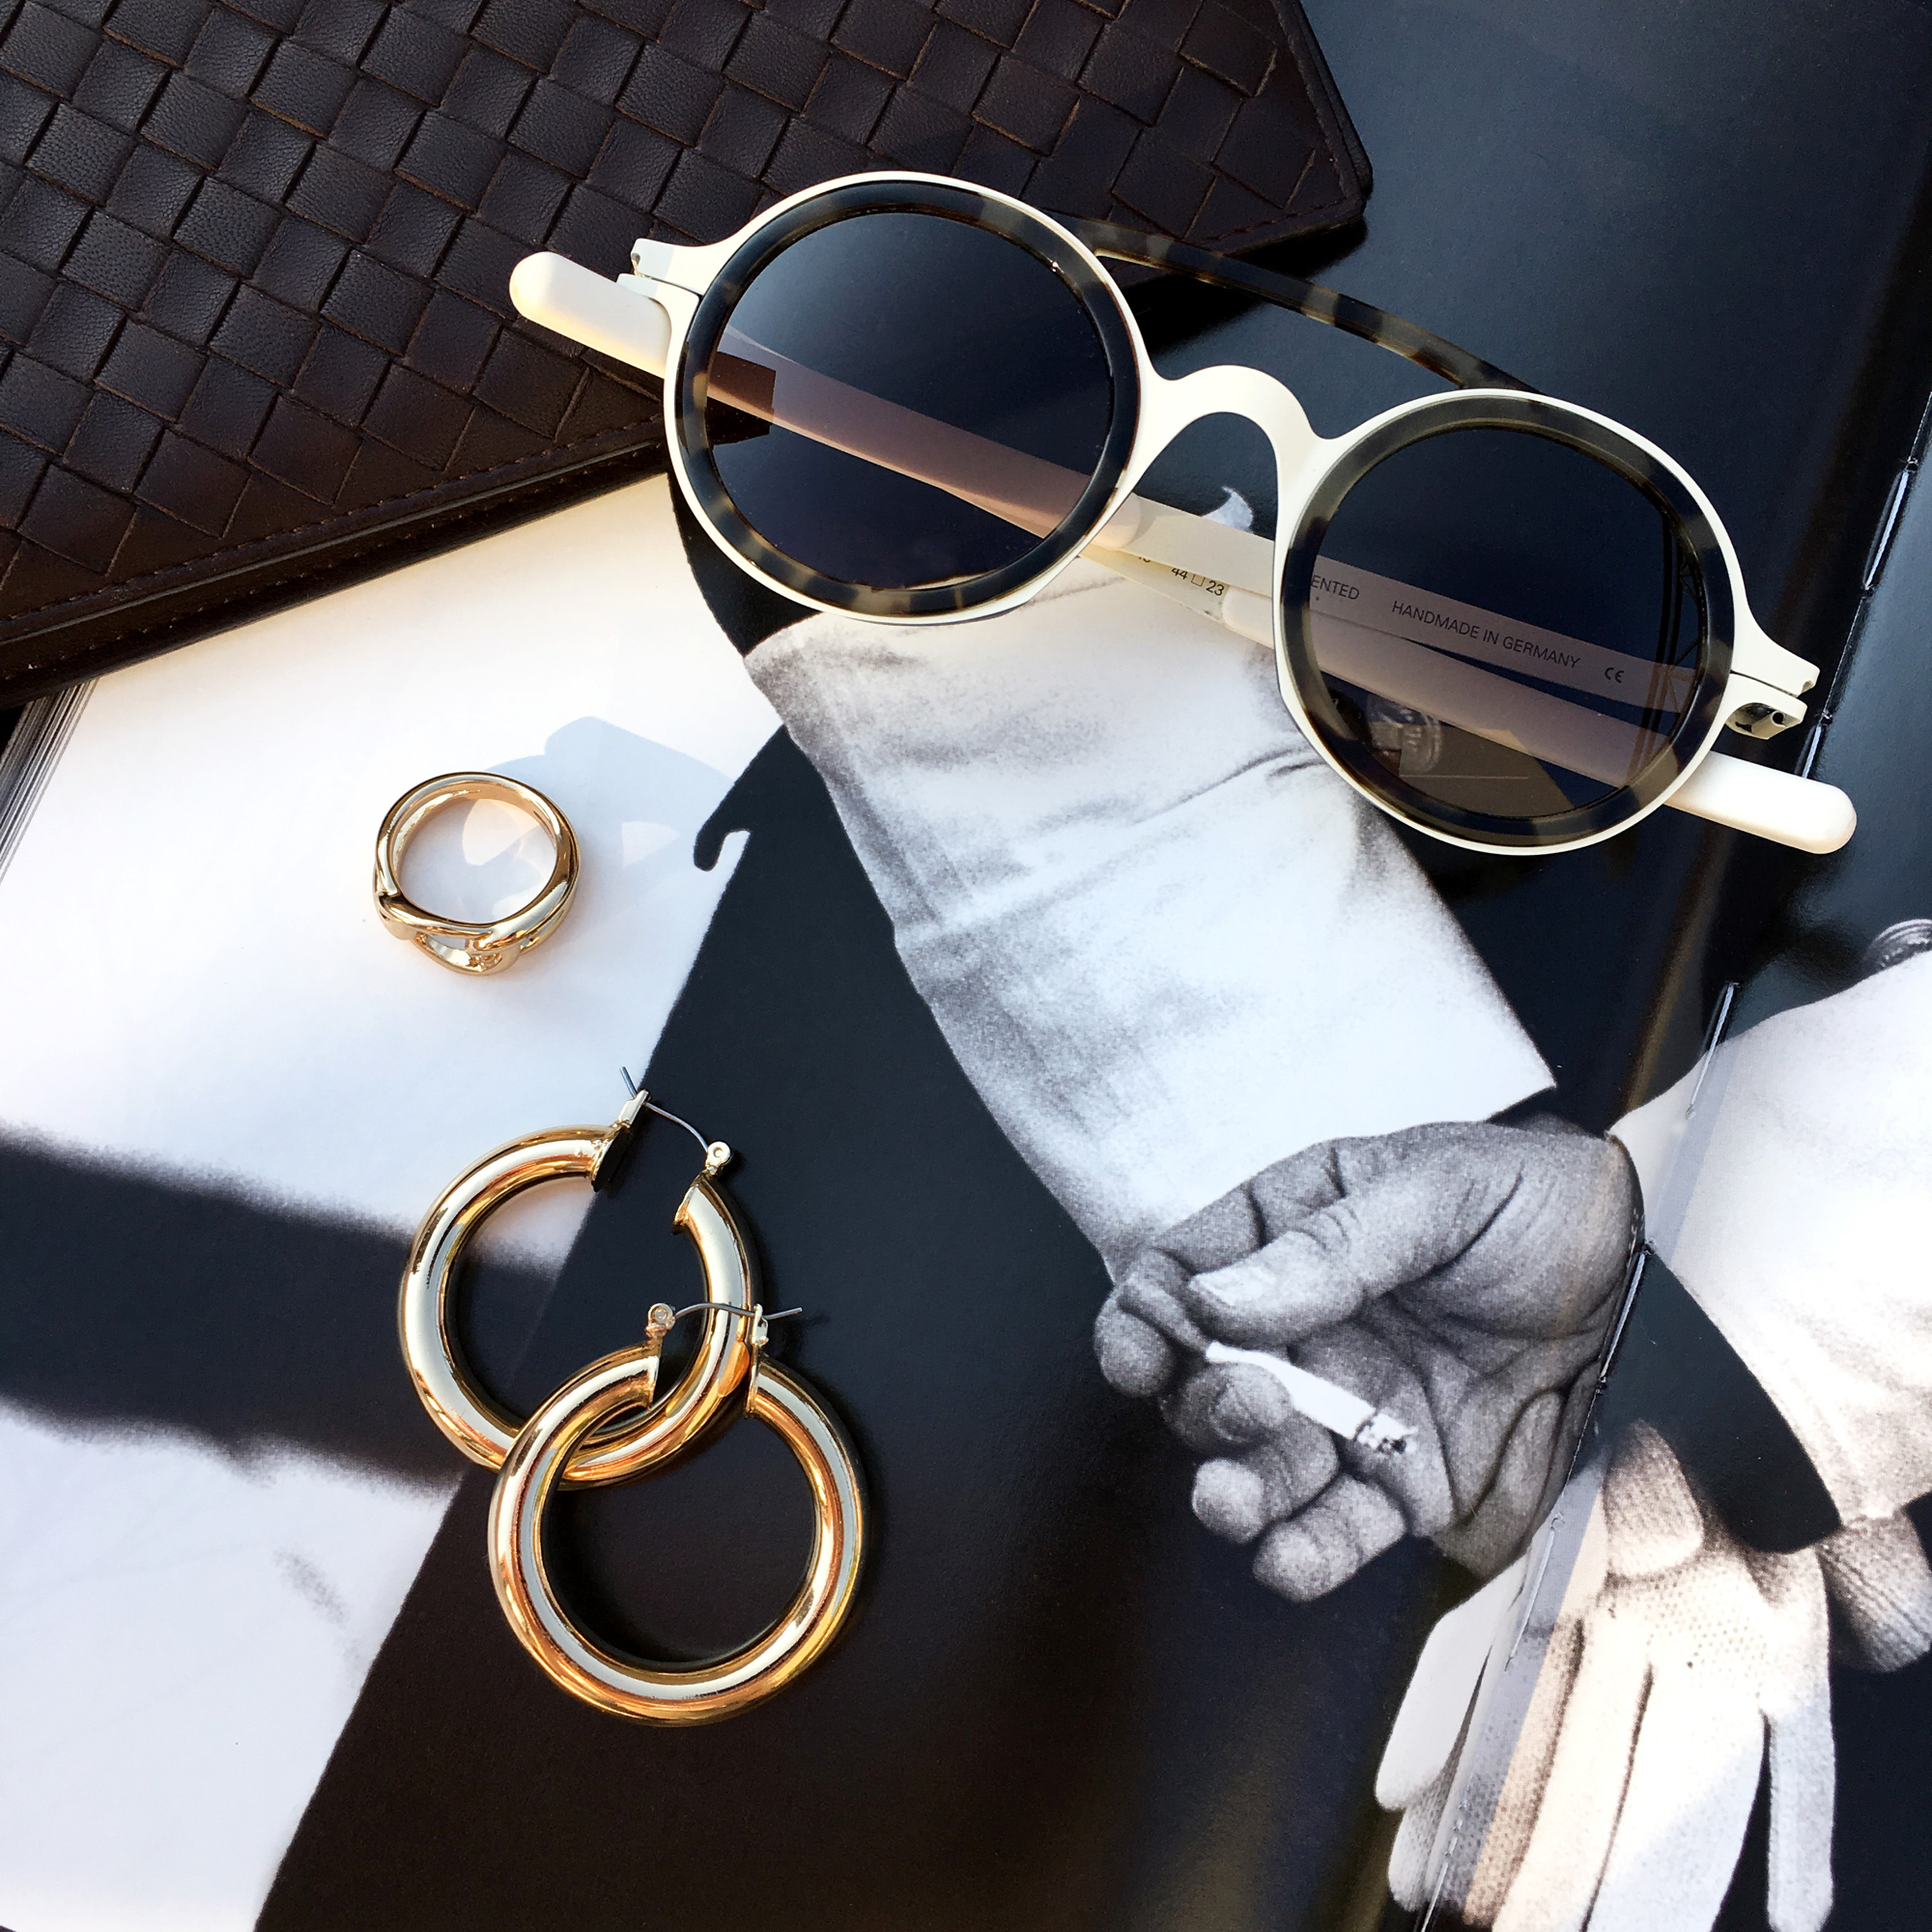 Sunglasses placed on magazine with jewelry